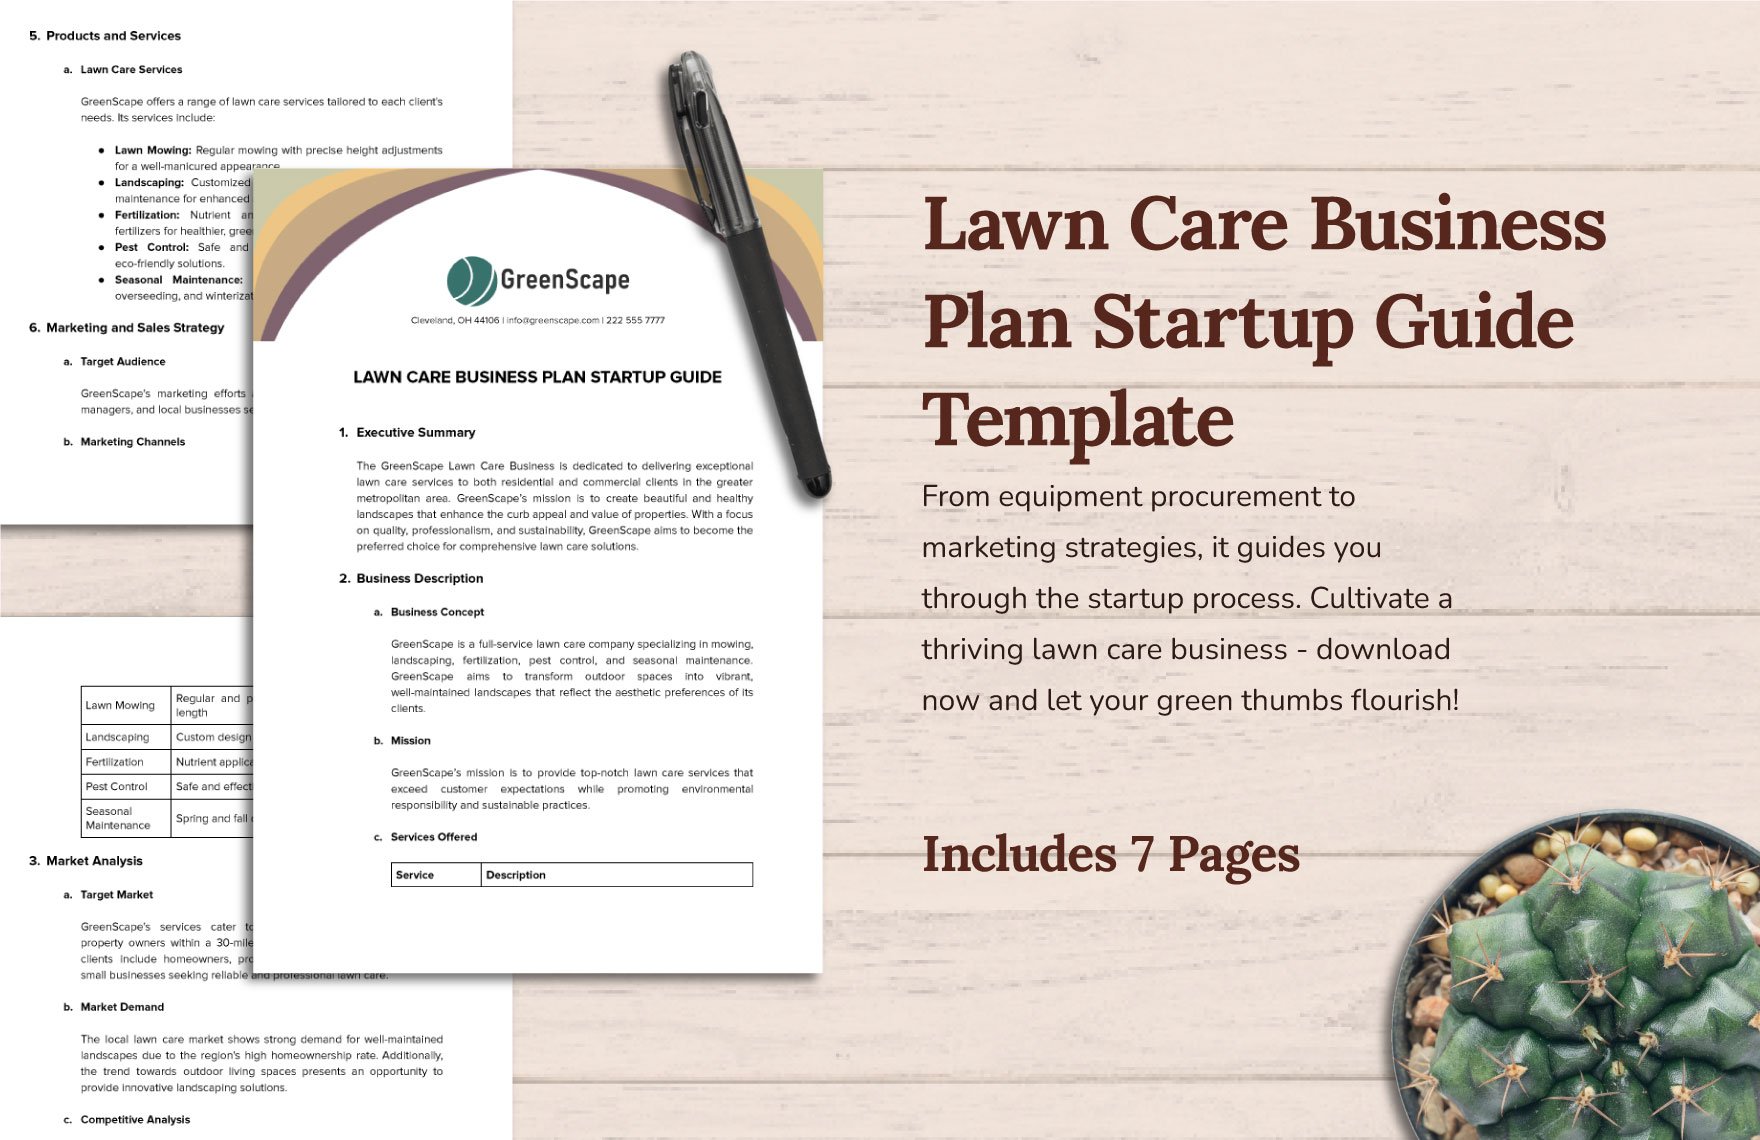 Lawn Care Business Plan Startup Guide Template